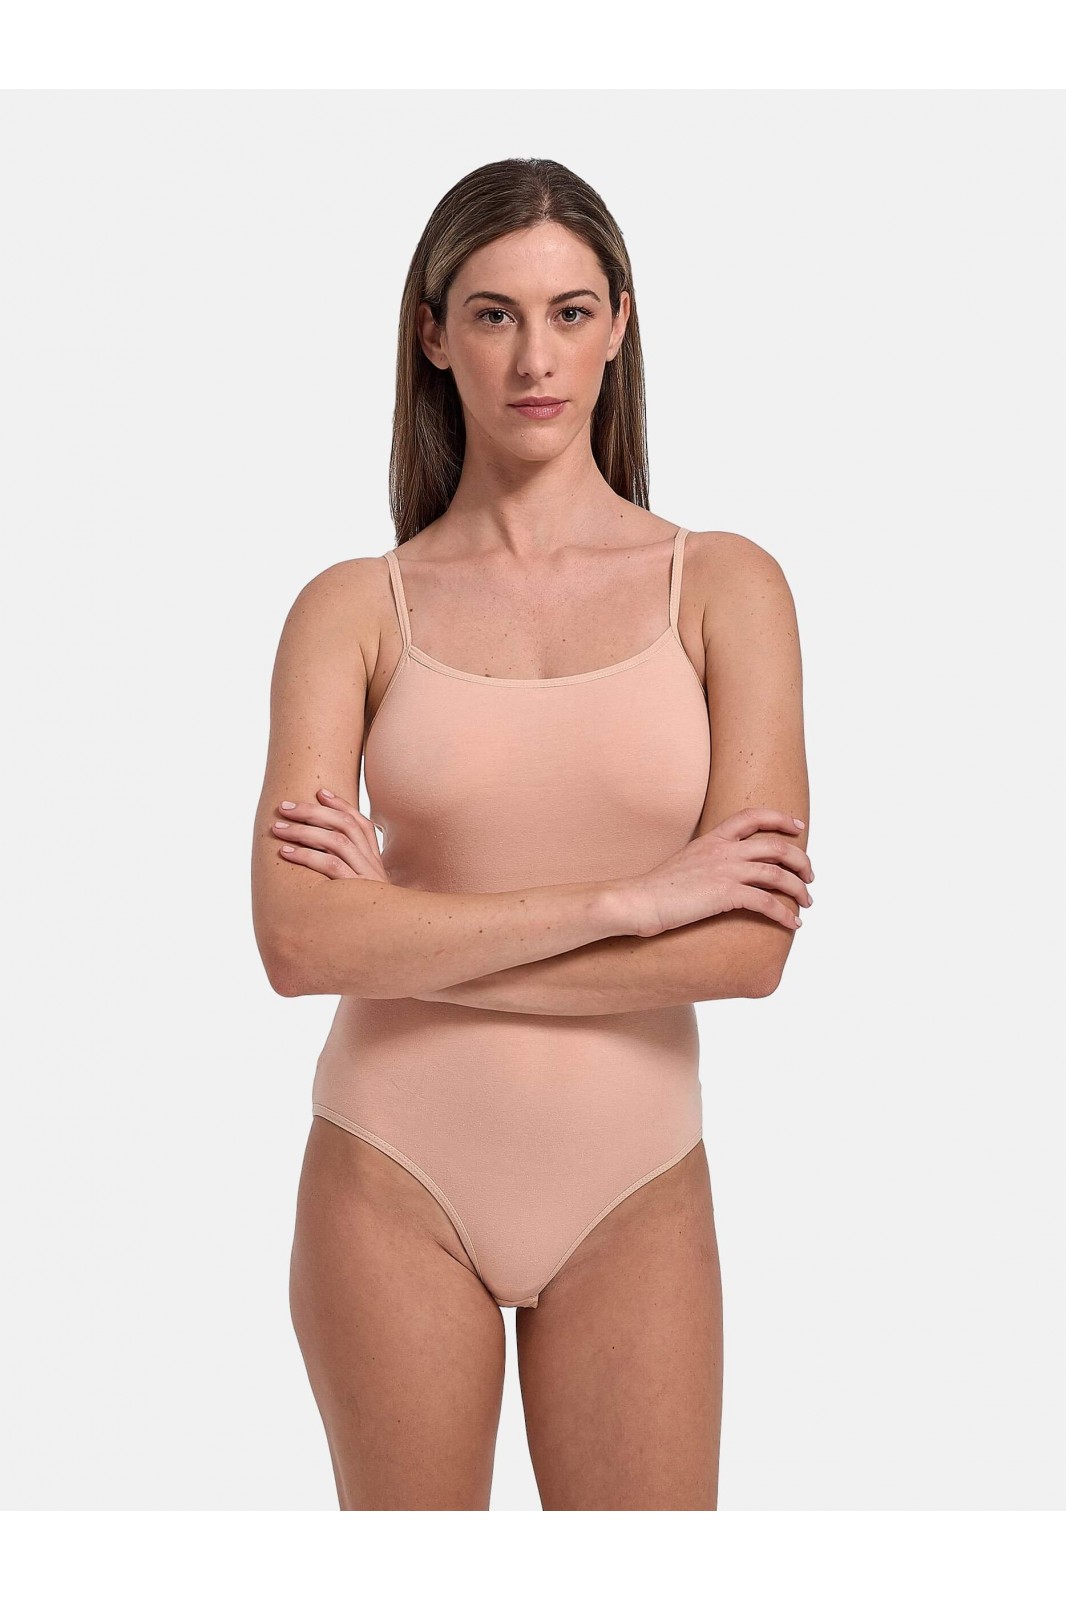 Bodysuit Underwear with thin strap - 4 Colors